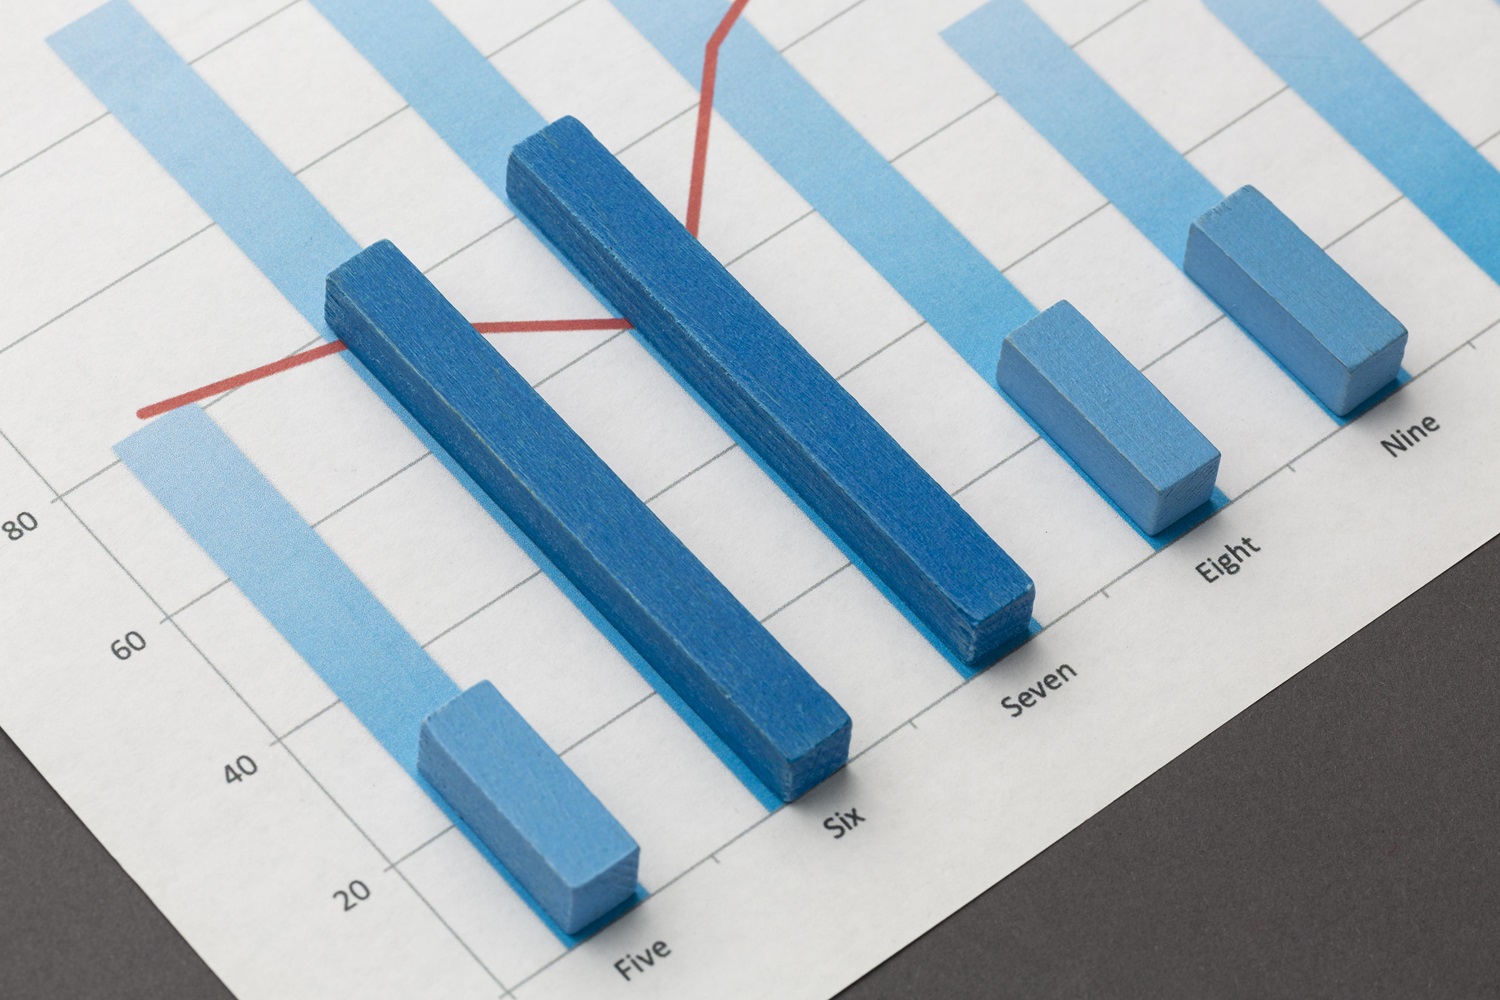 project-management-gantt-charts-stats-concept-with-wood-blocks